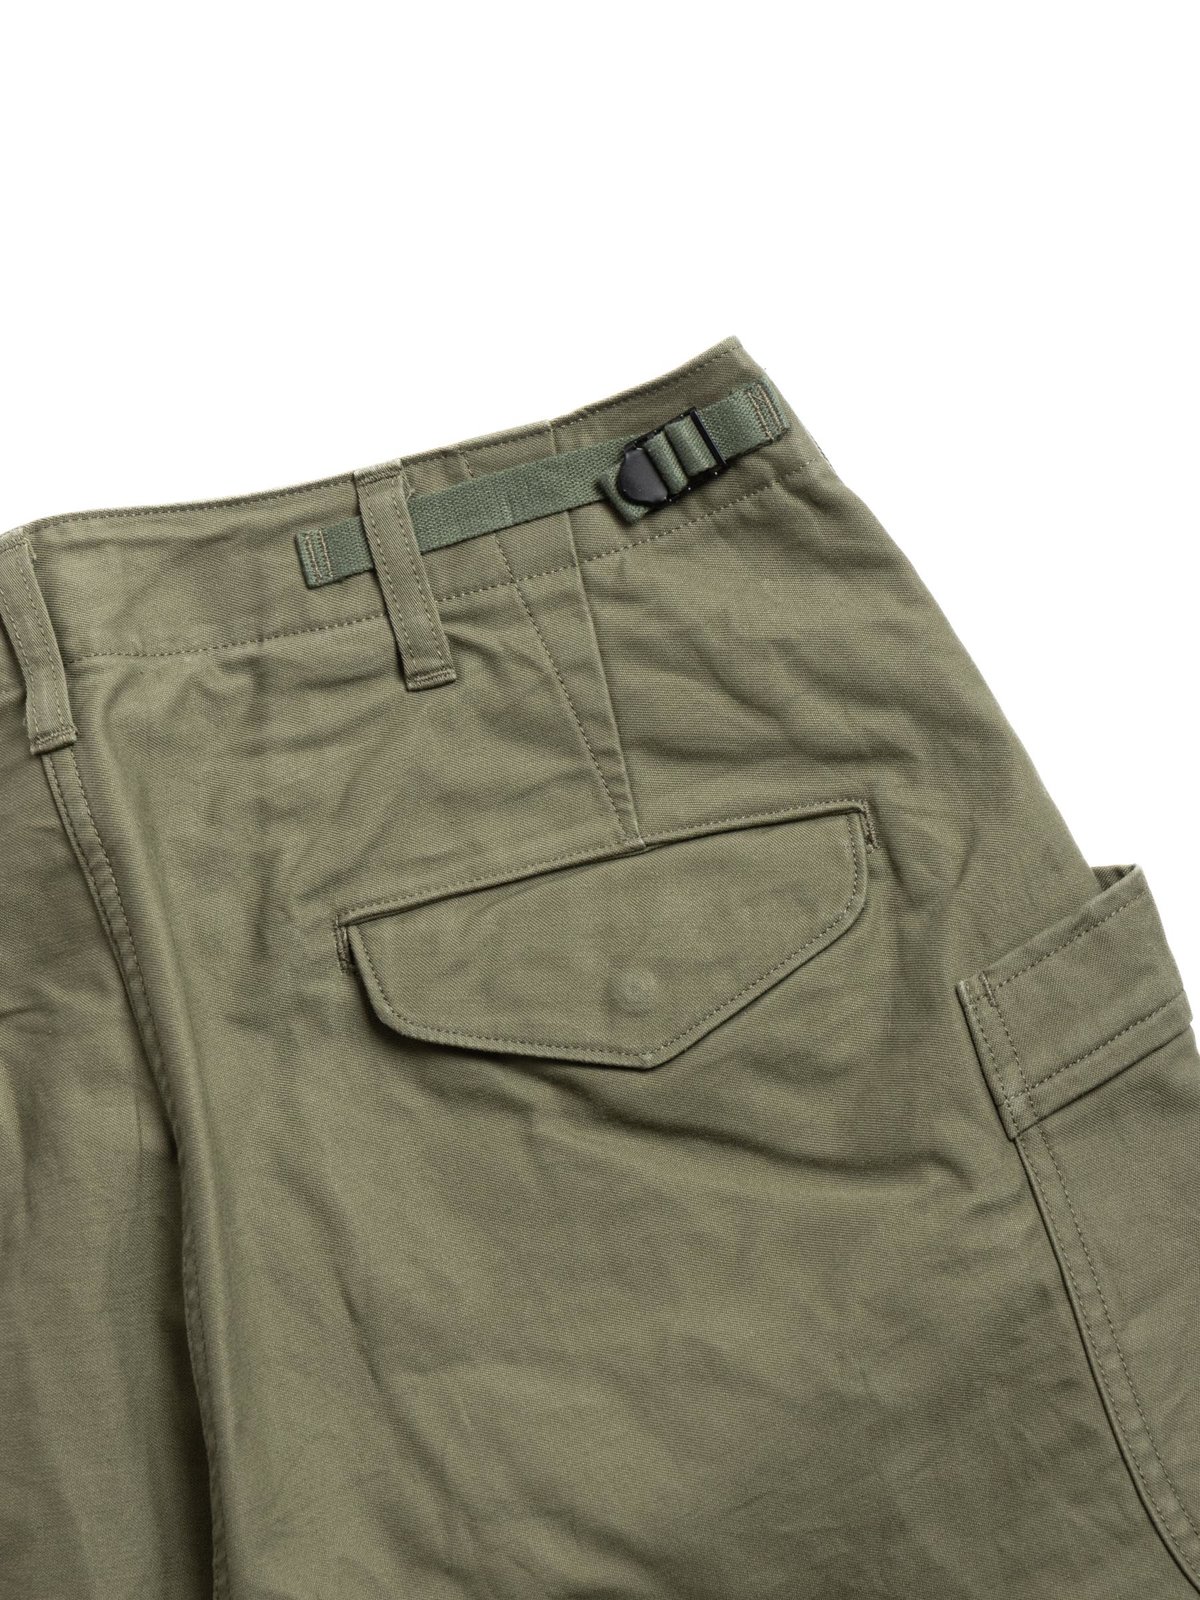 FATIGUE TROUSER OLIVE - Image 5